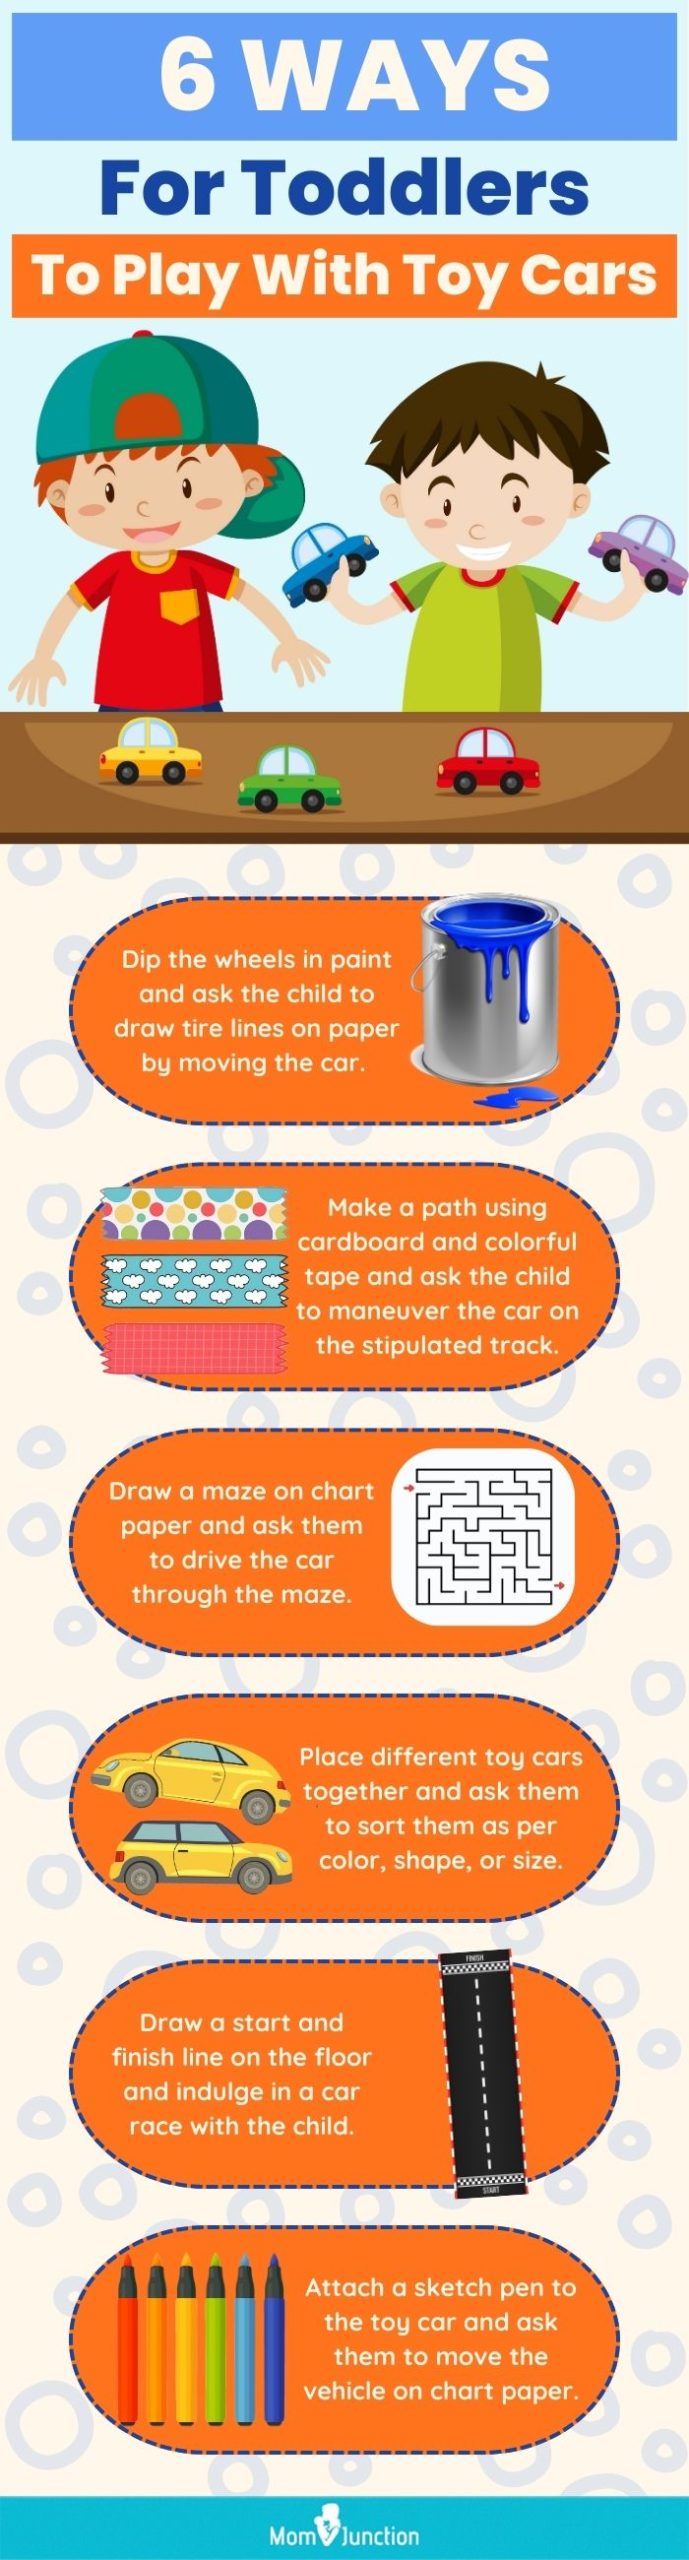 6 Ways For Toddlers To Play With Toy Cars (infographic)